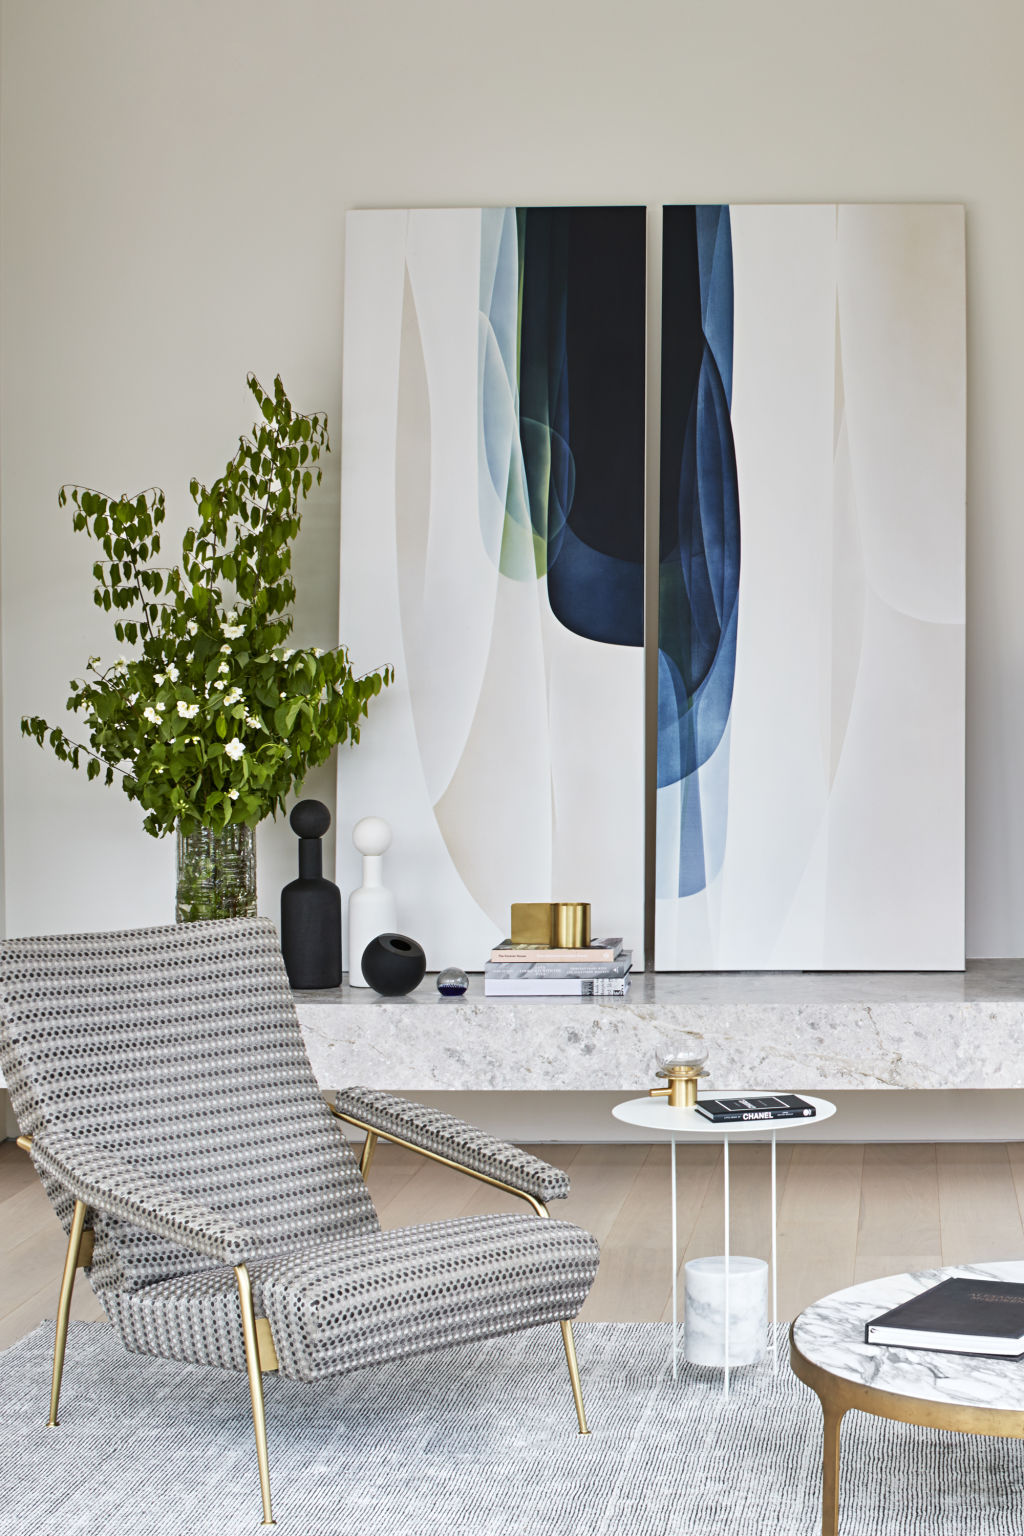 You will learn what resonates with you and the type of art you wish to collect. Photo: Shannon McGrath. Artwork: Agneta Ekholm. Art & Styling: Swee Design. Architecture & Interiors: Tecture.